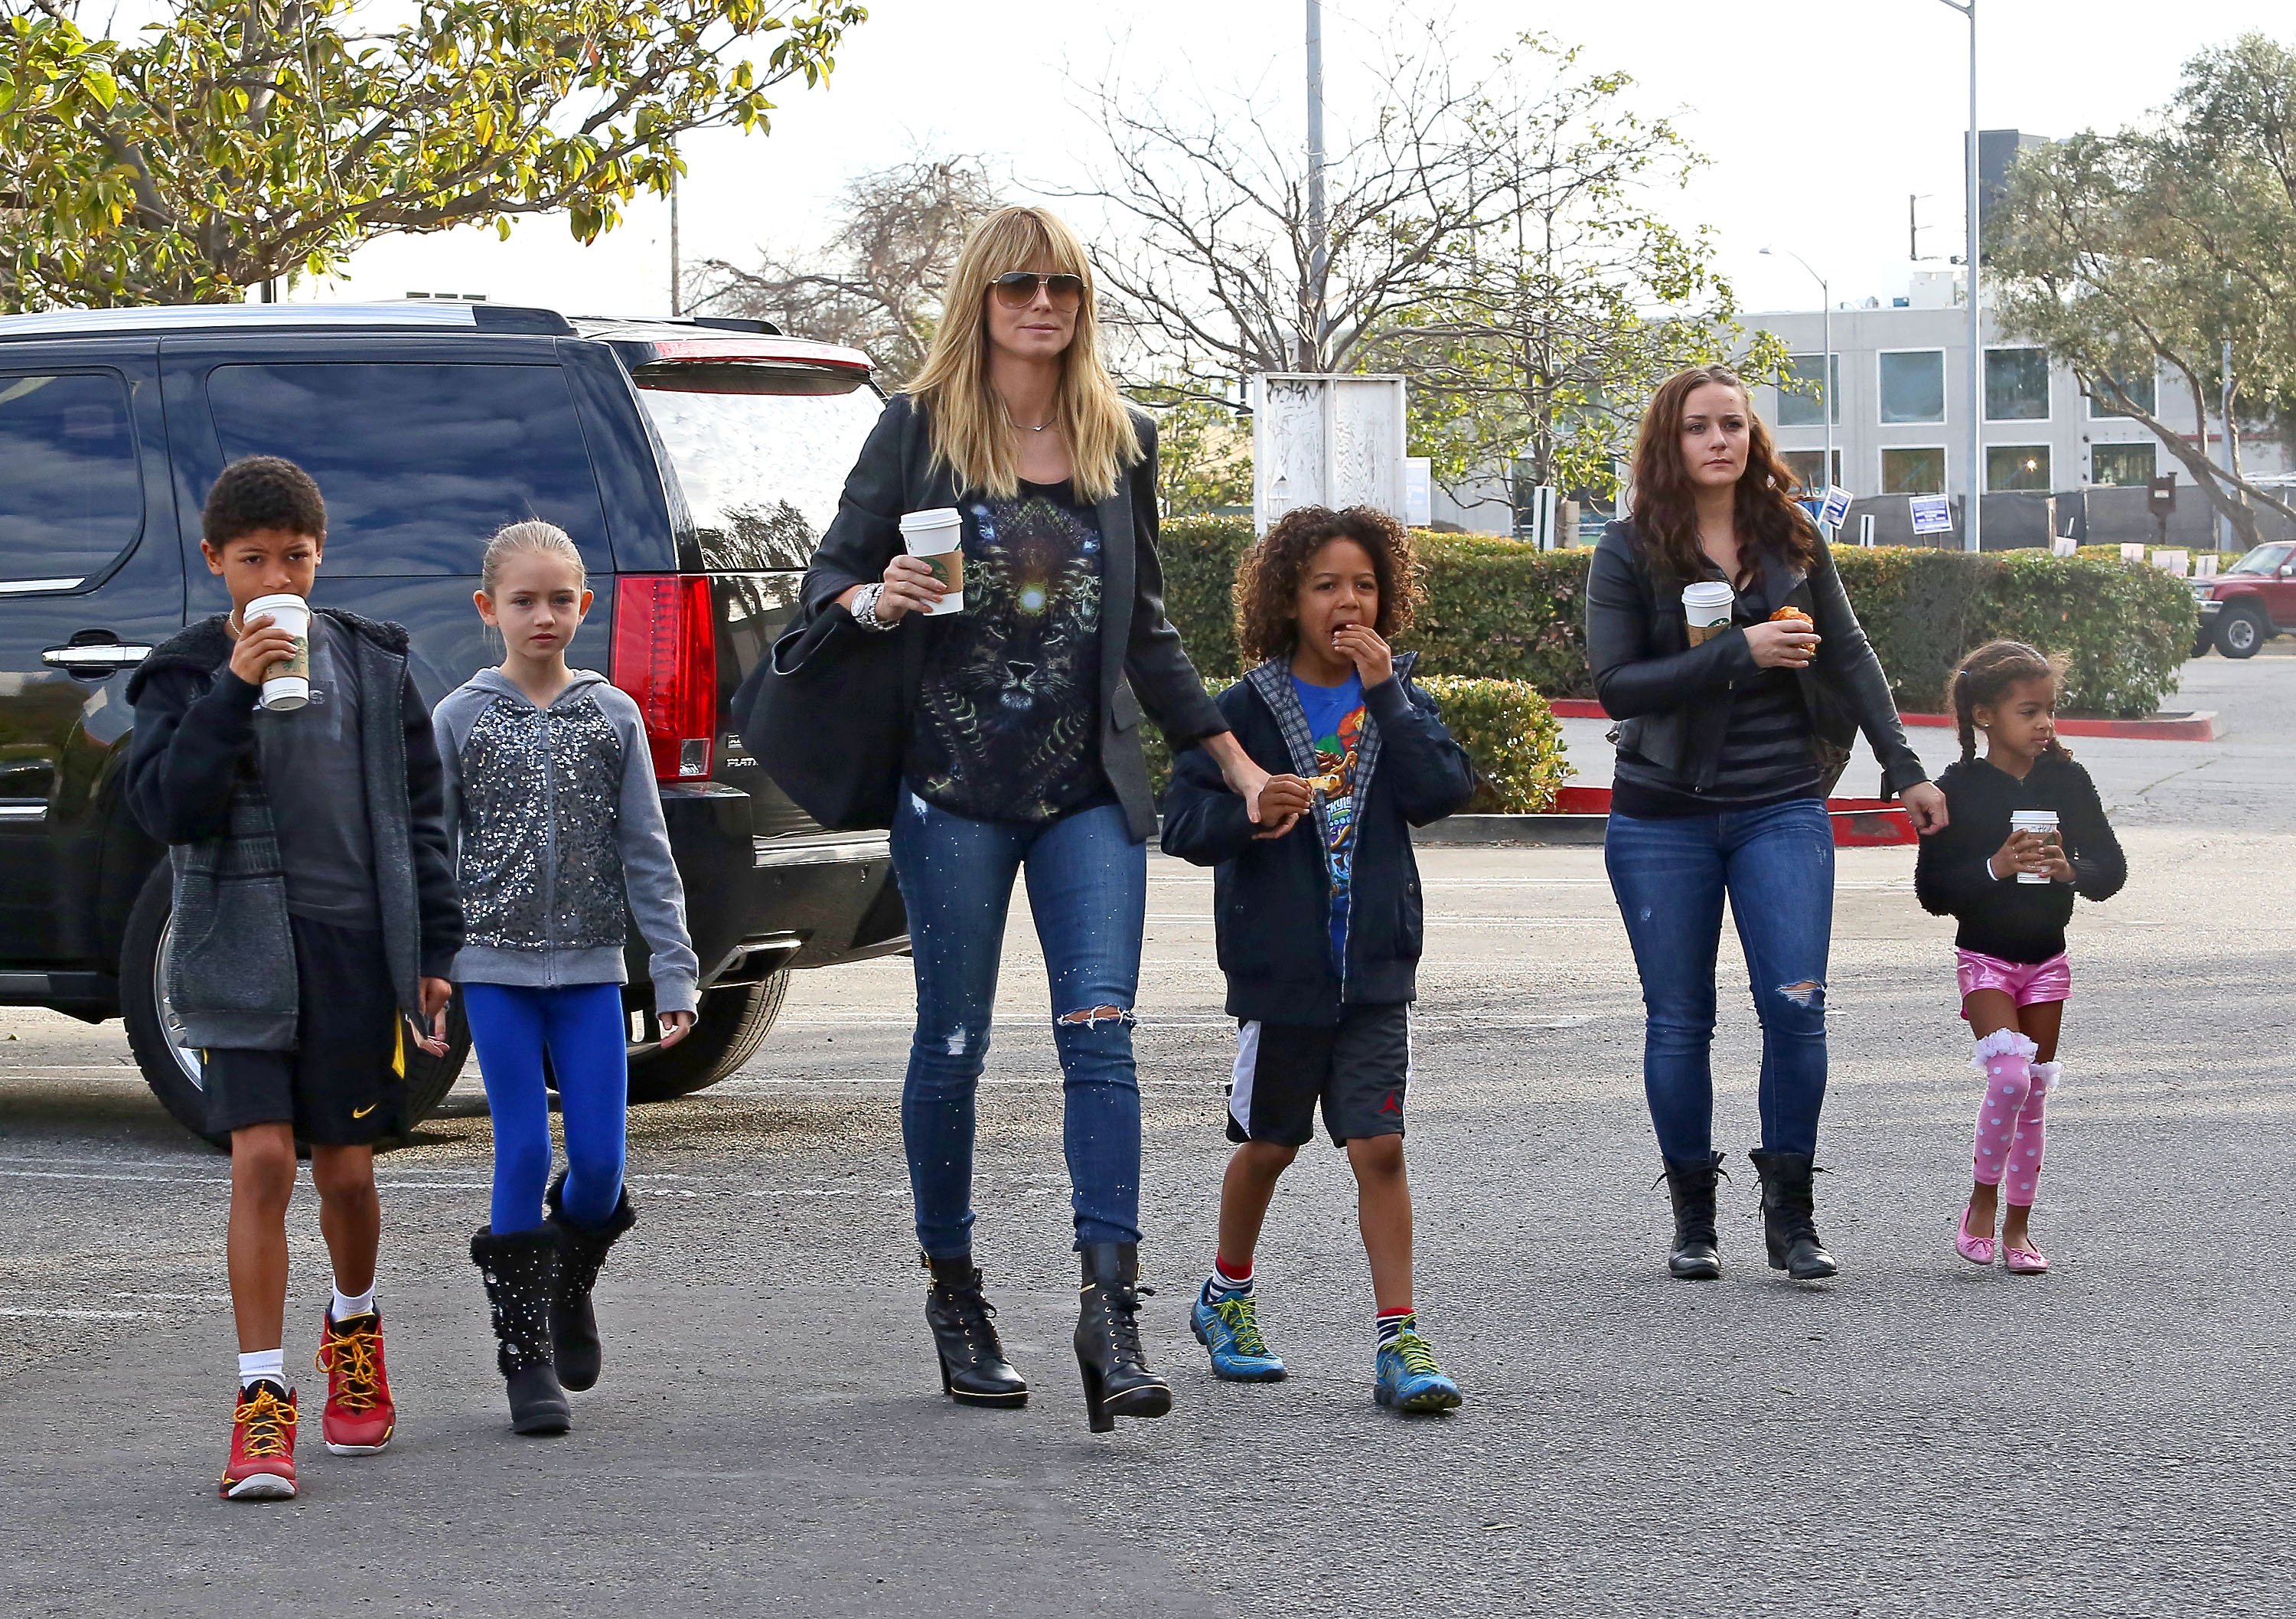 Heidi Klum is seen with her children, Henry, Johan, Lou and Leni in Los Angeles in 2014 | Source: Getty Images